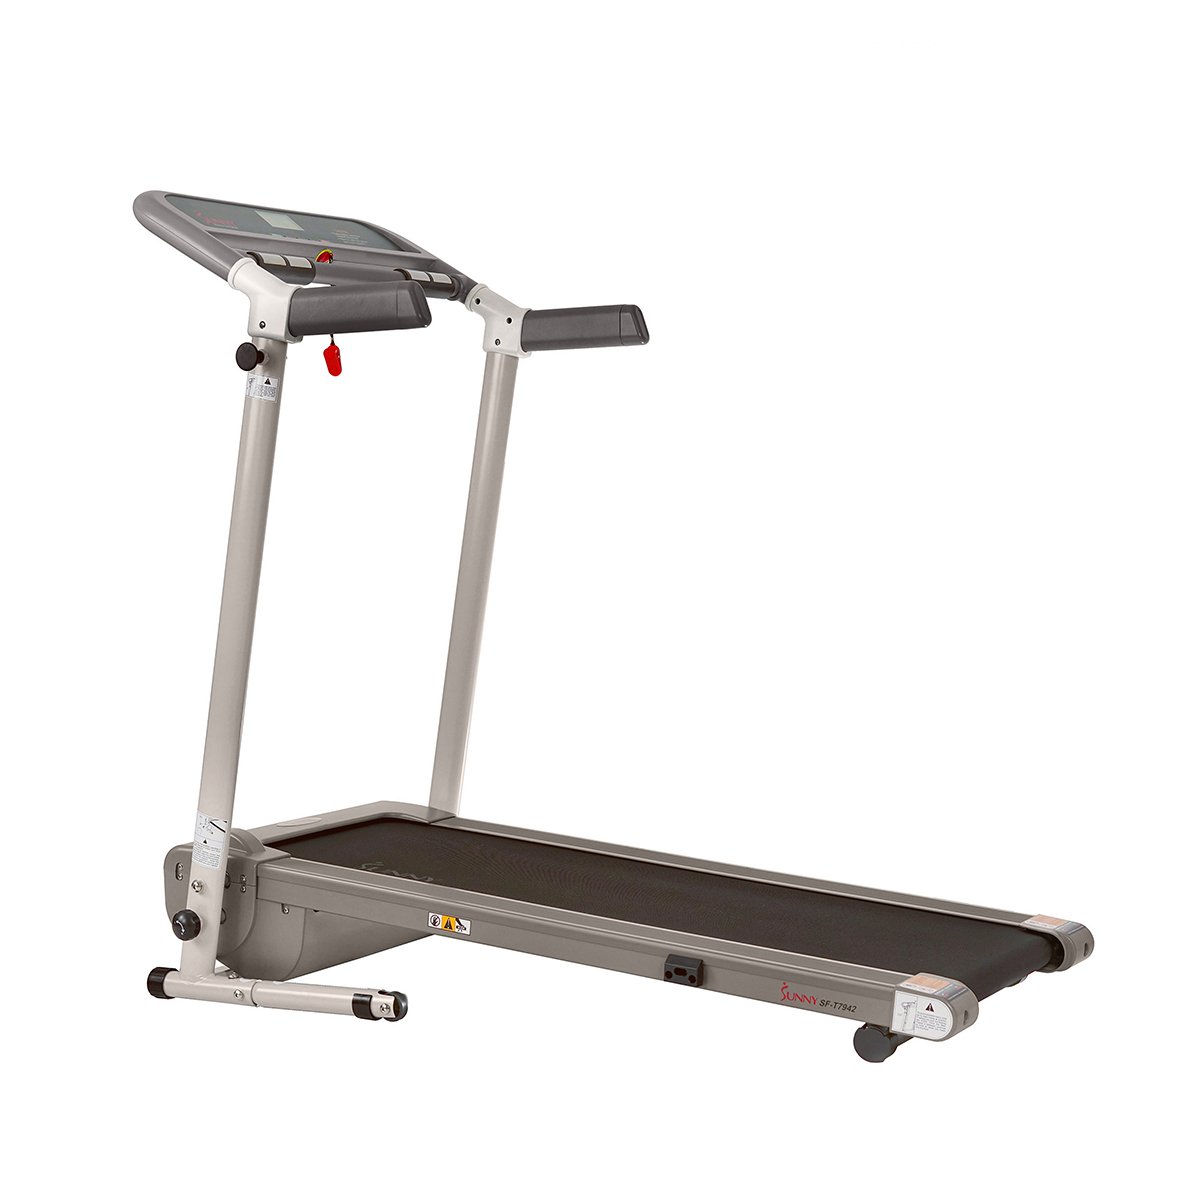 Sunny Health & Fitness Fixed Incline, Foldable Home Gym Walking Treadmill, 220 lb Max Weight, 1.25 HP - SF-T7942 - image 3 of 10